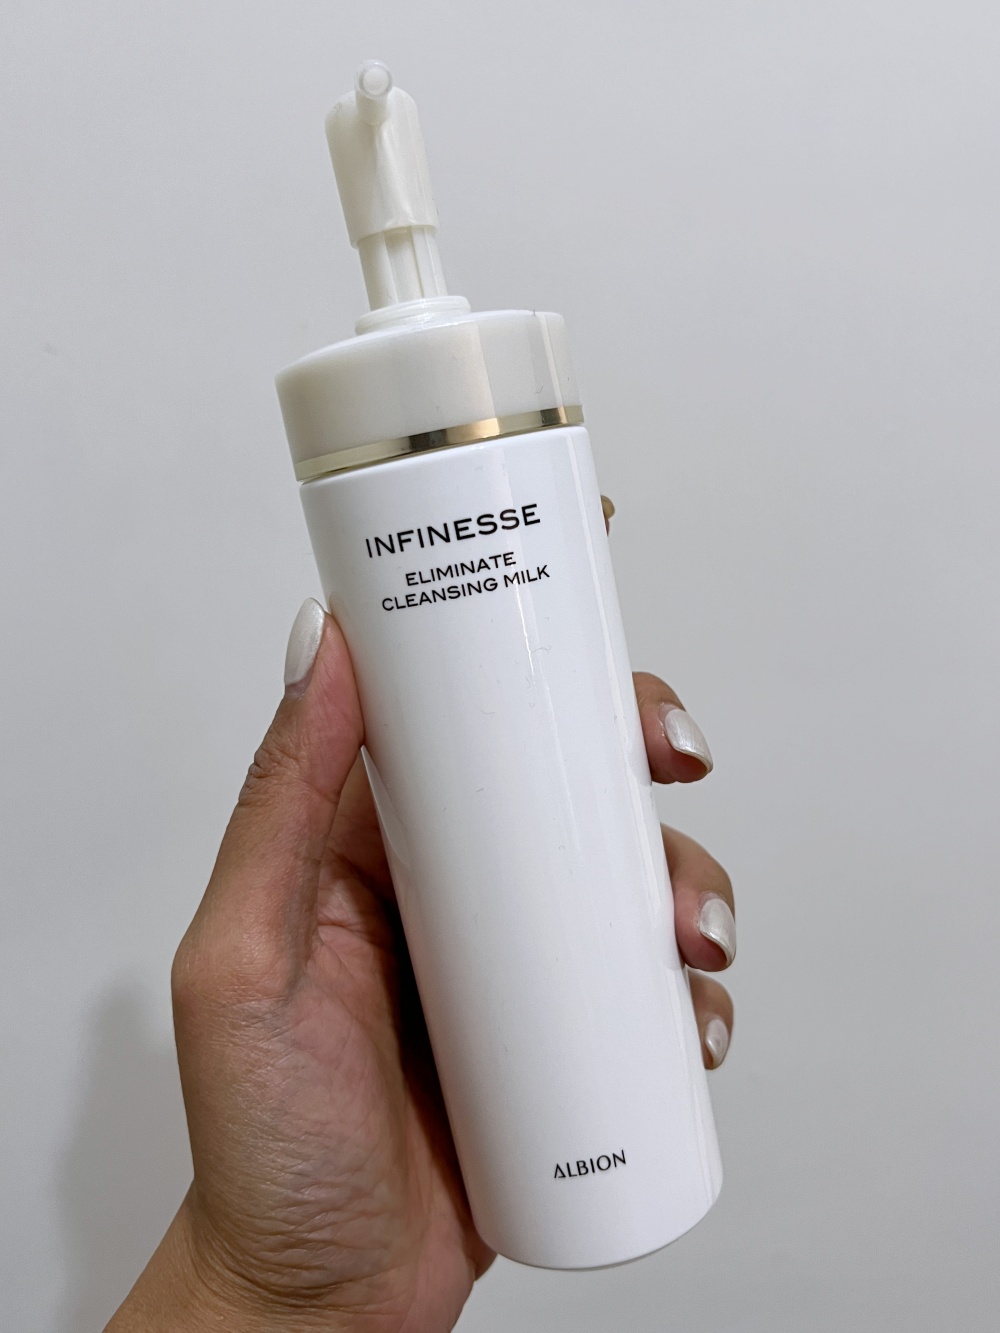 Albion Infinesse Eliminate Cleansing Milk